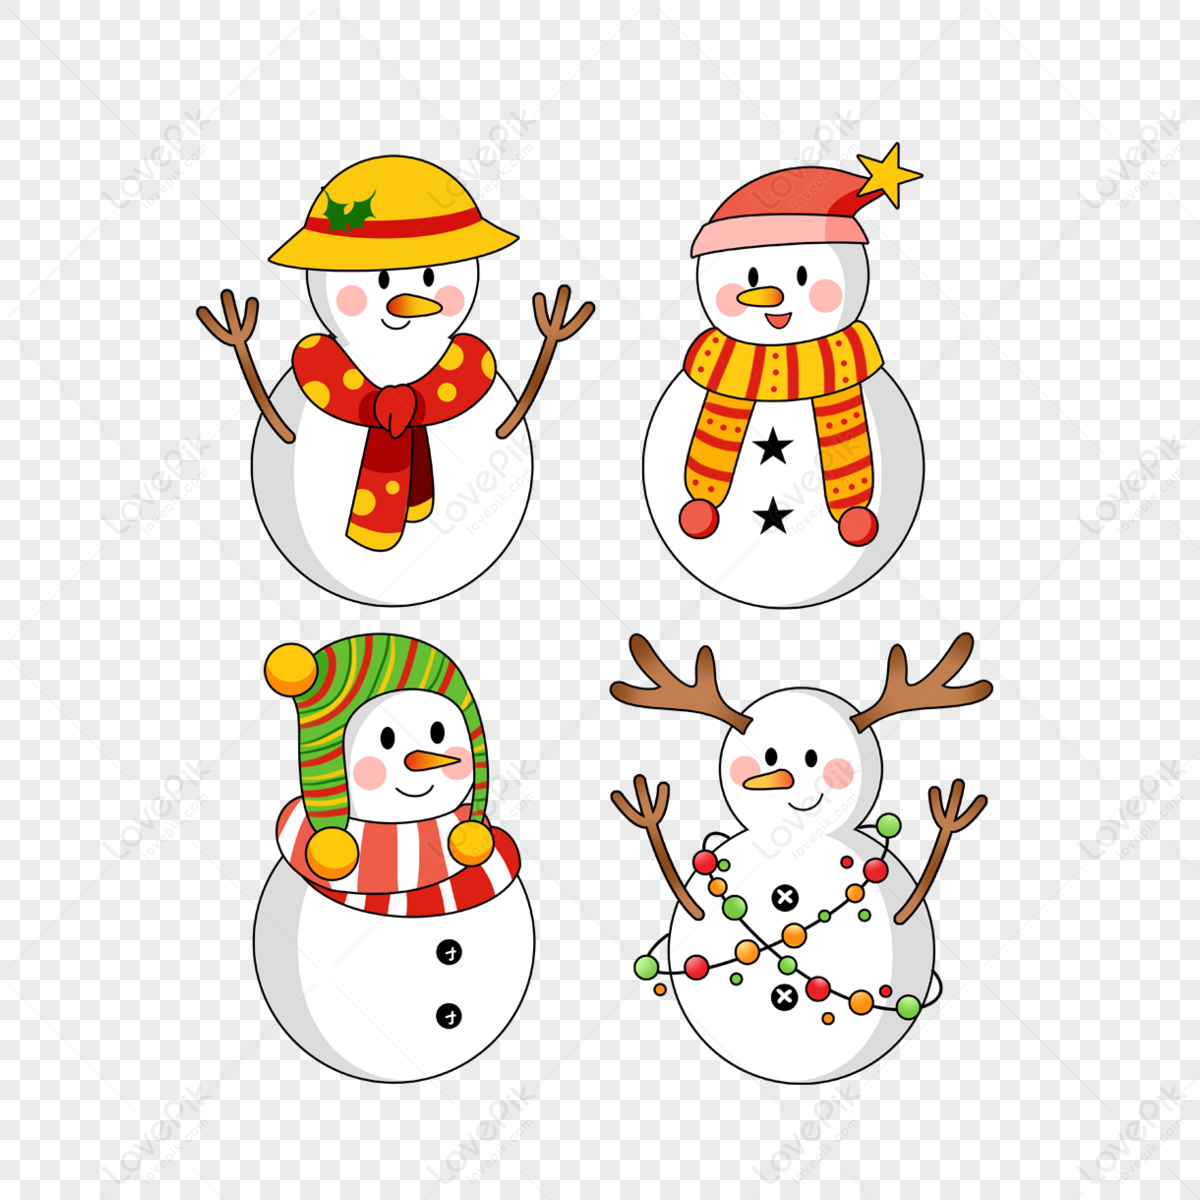 Hand Drawn Snowman PNG Image, Hand Drawn Cartoon Cute Christmas Snowman,  Snowman Clipart, Snowman, Christmas PNG Image For Free Download